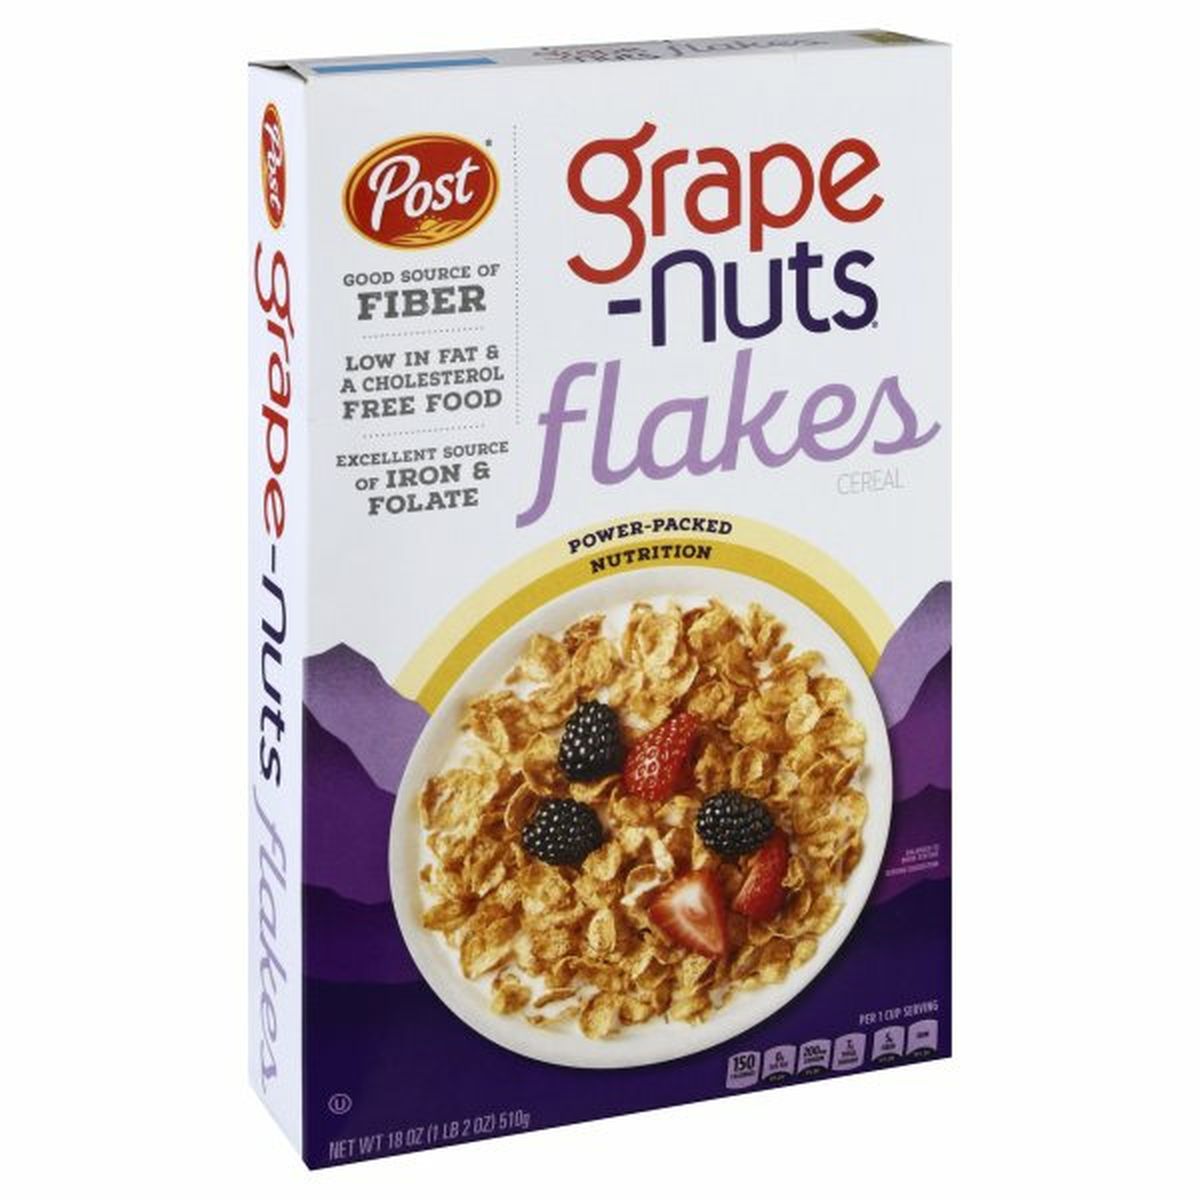 Calories in Post Cereal, Flakes